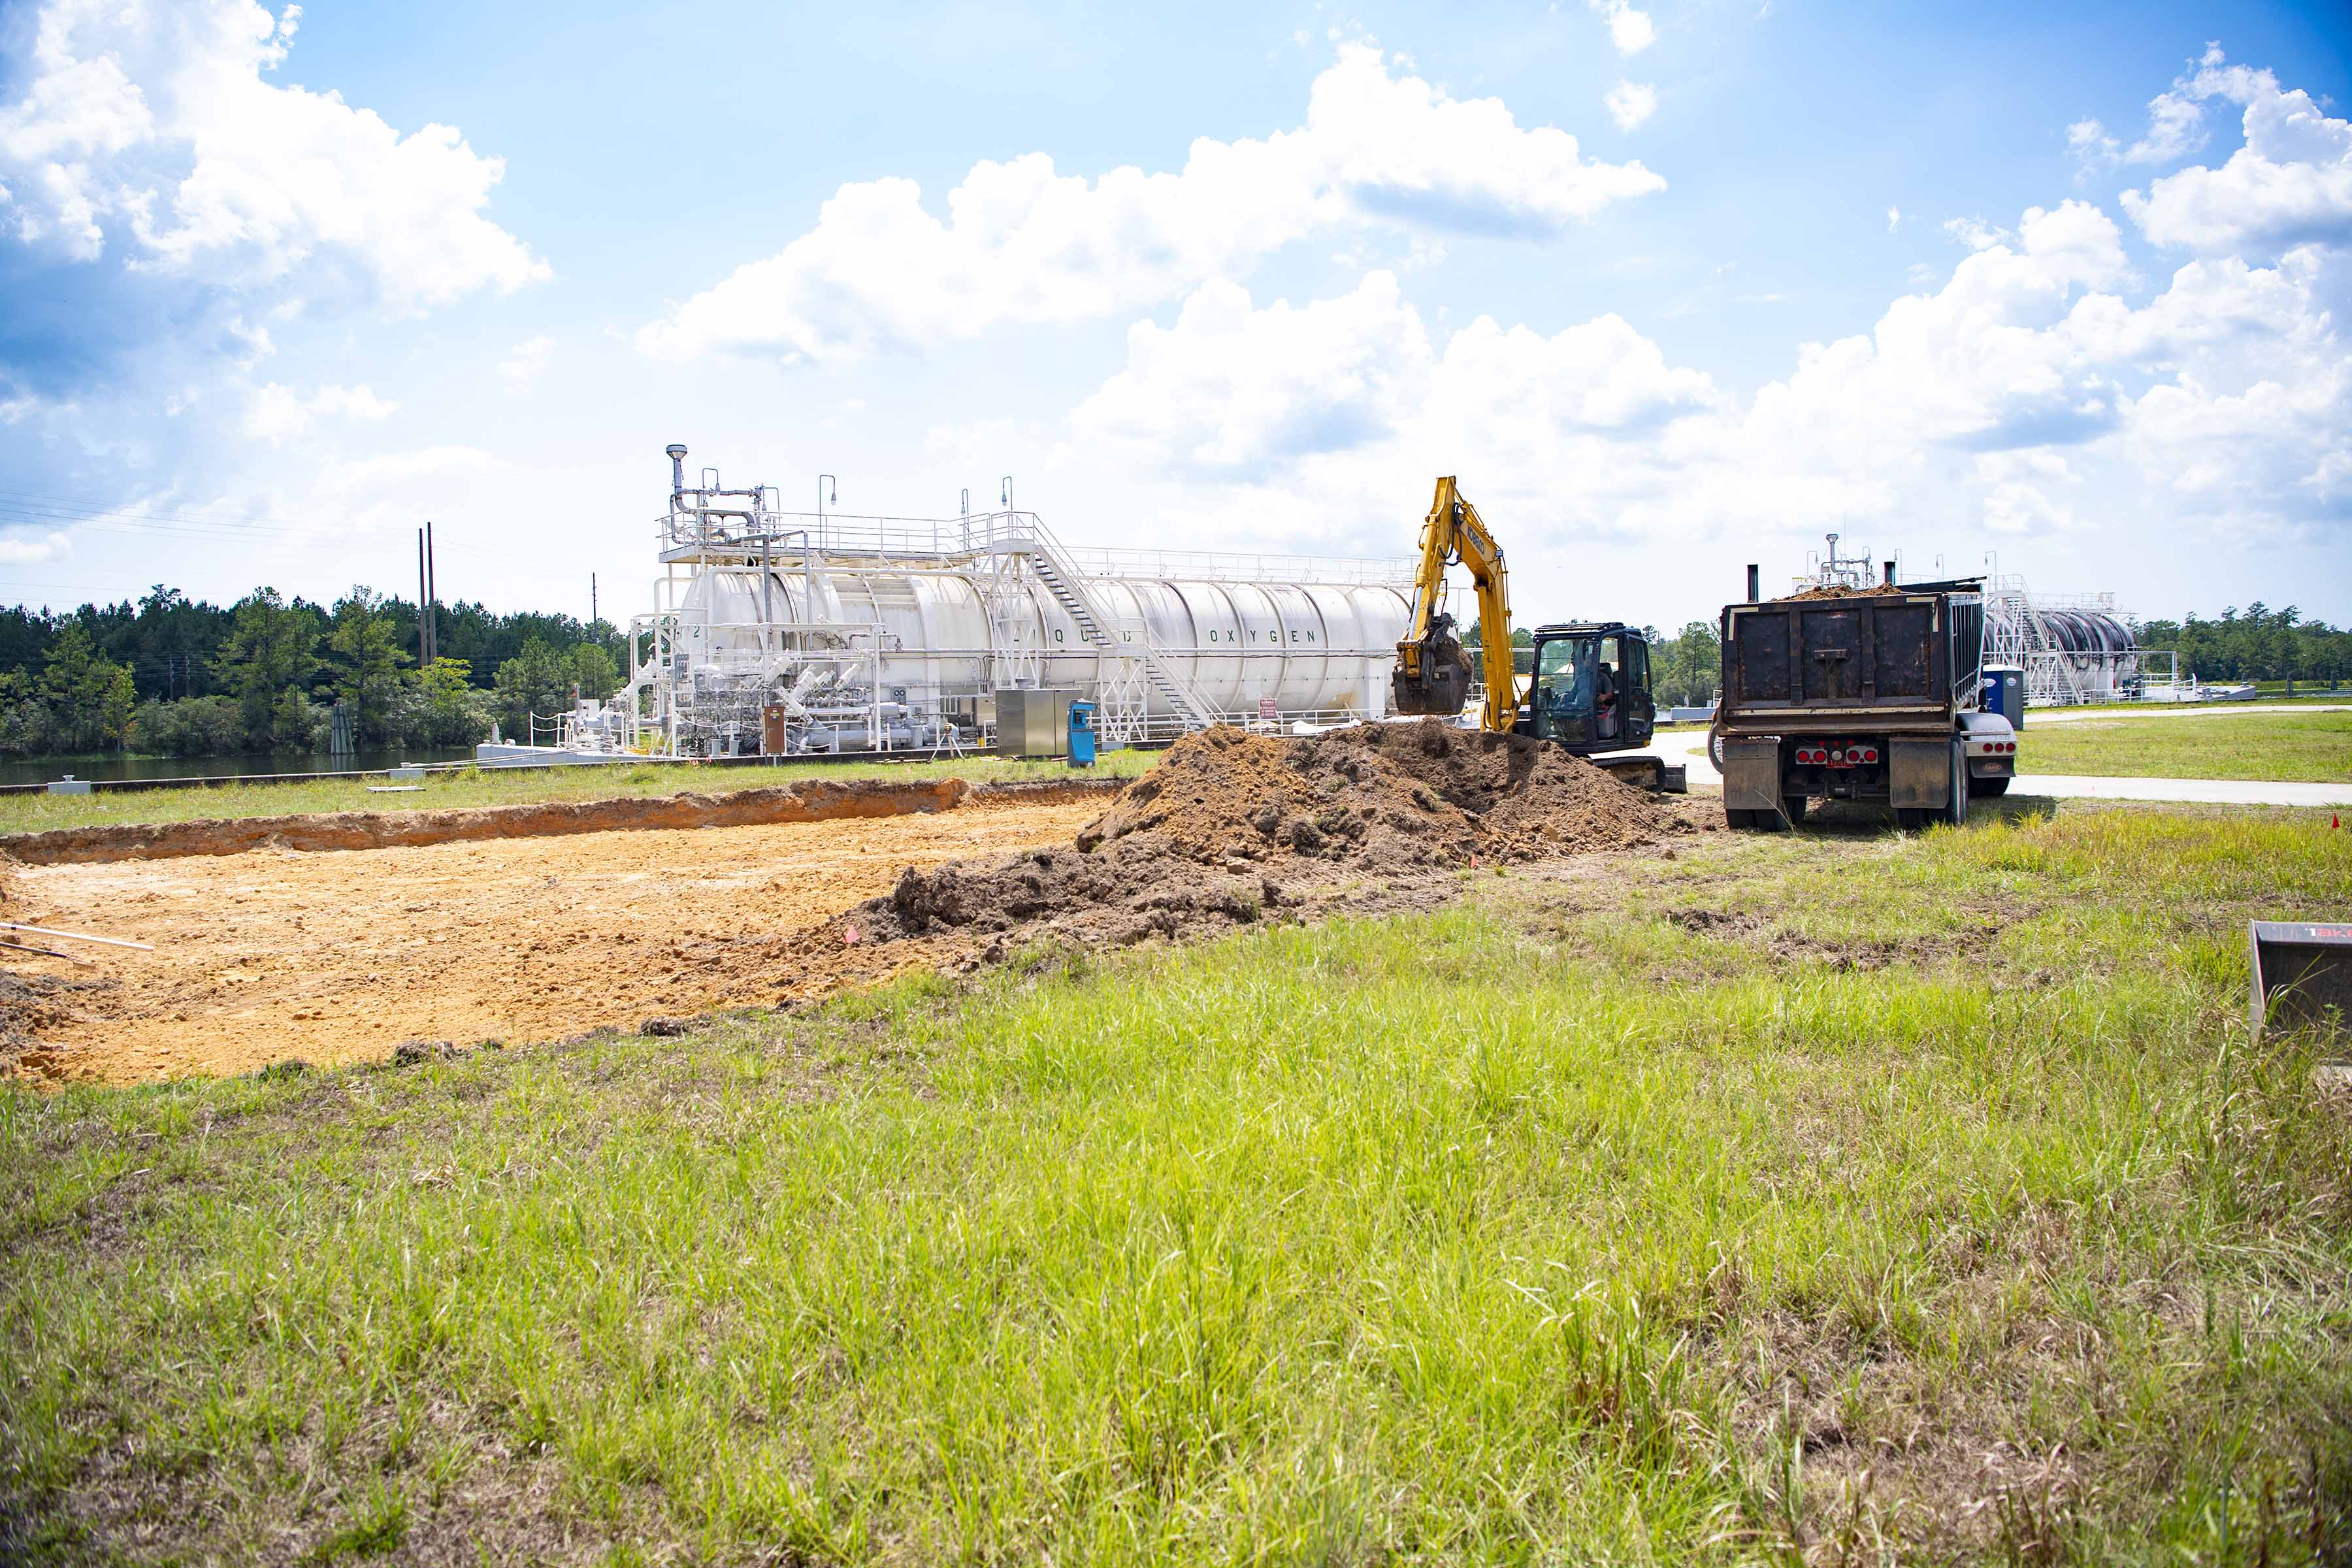 The ground is being prep for new test area at Stennis Space Center.